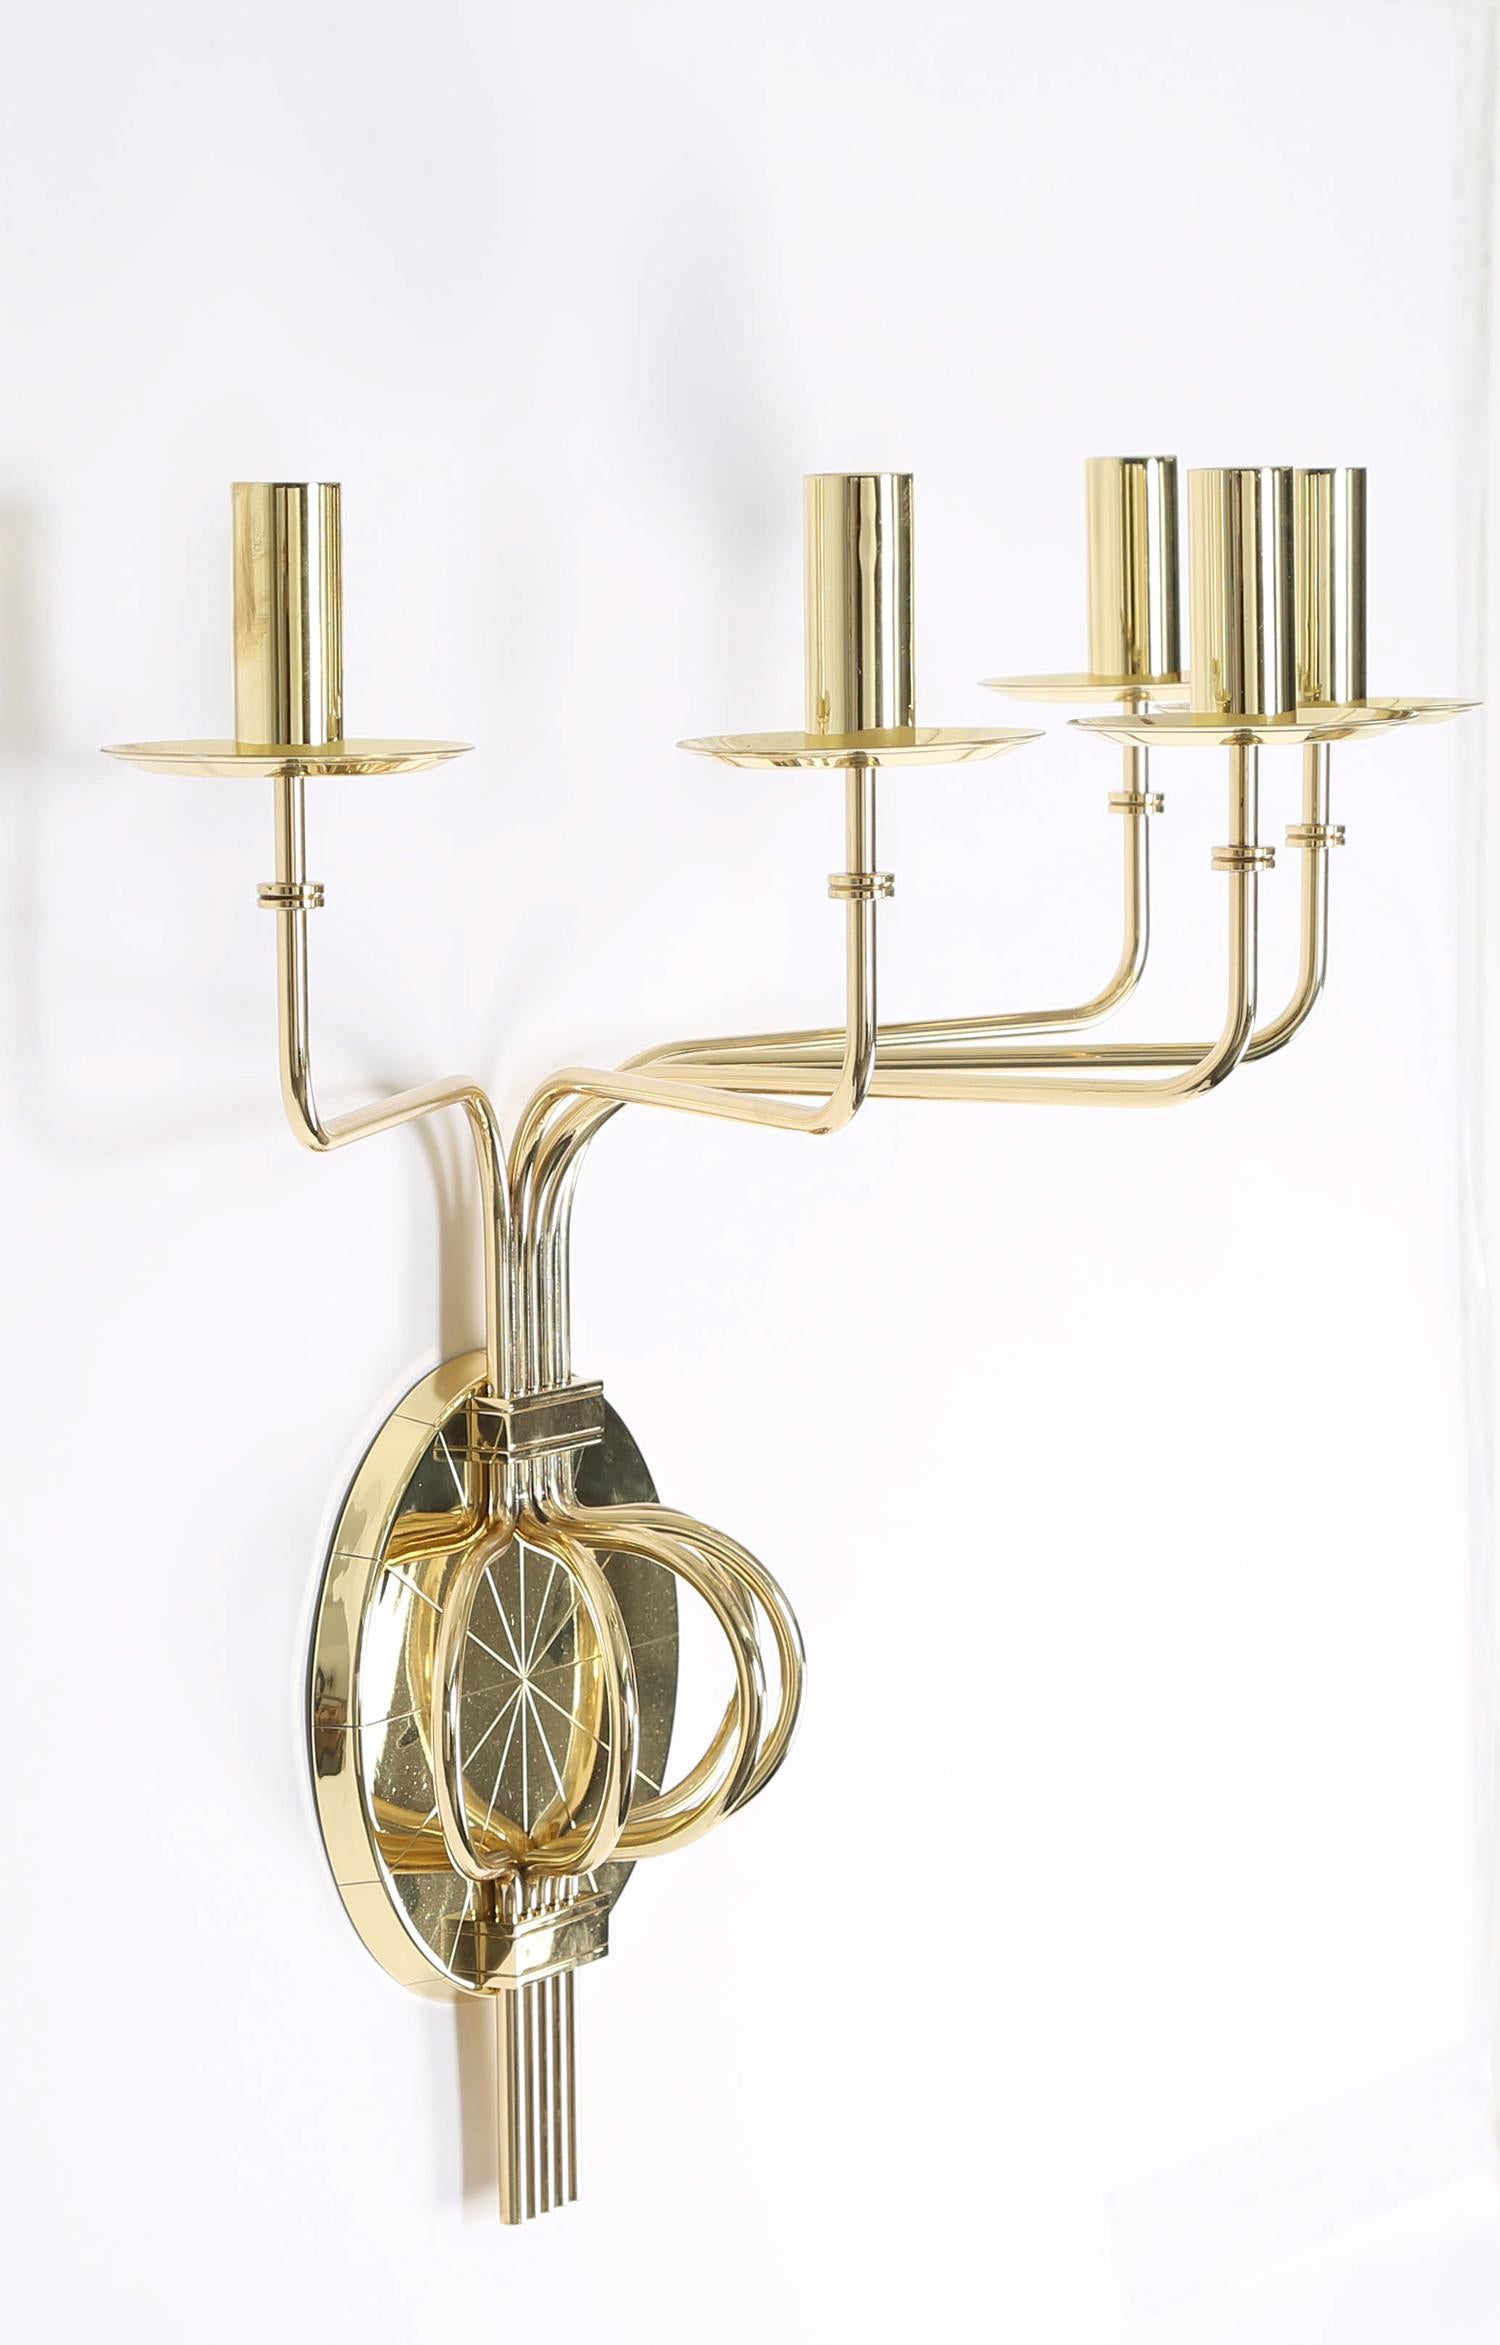 Hand-Crafted Tommi Parzinger Pair of Impressive 5 Arm Wall Sconces in Polished Brass, 1950s For Sale